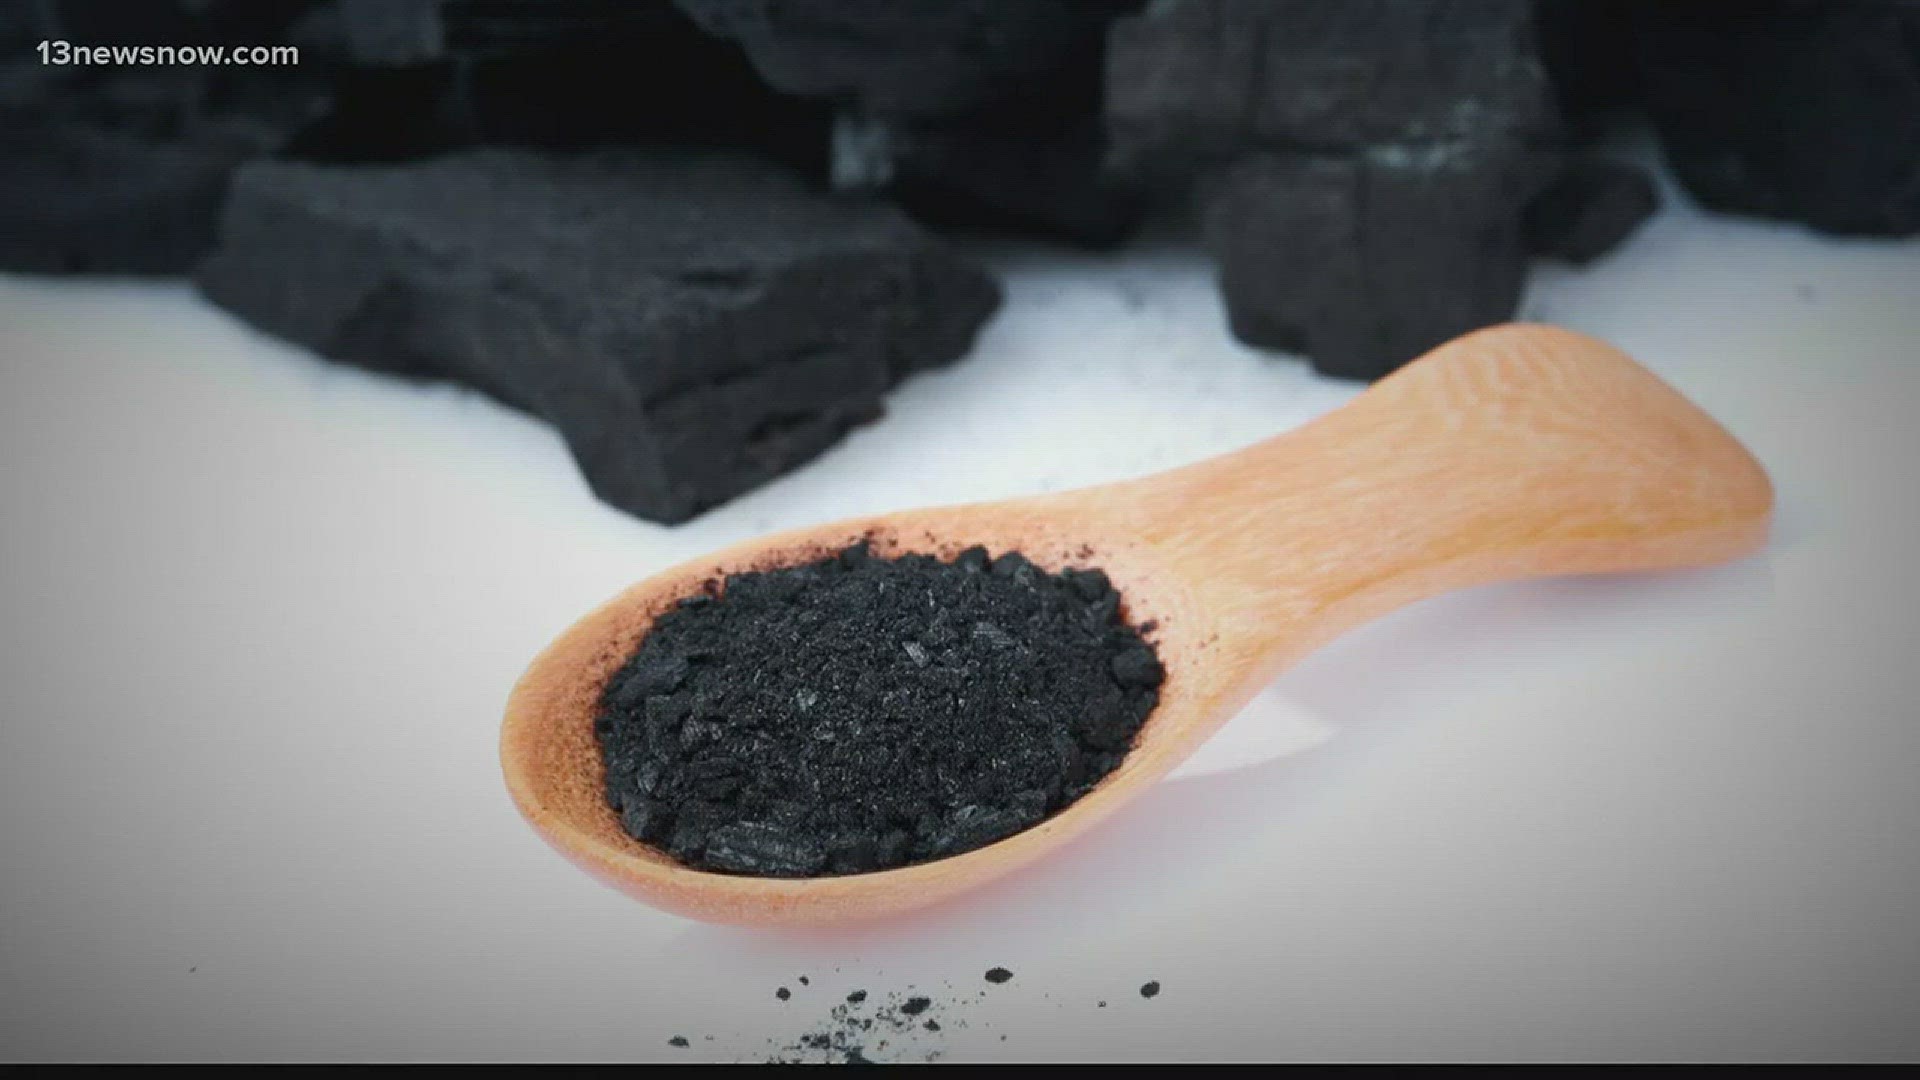 Some people are drinking activated charcoal to lose weight and detox.